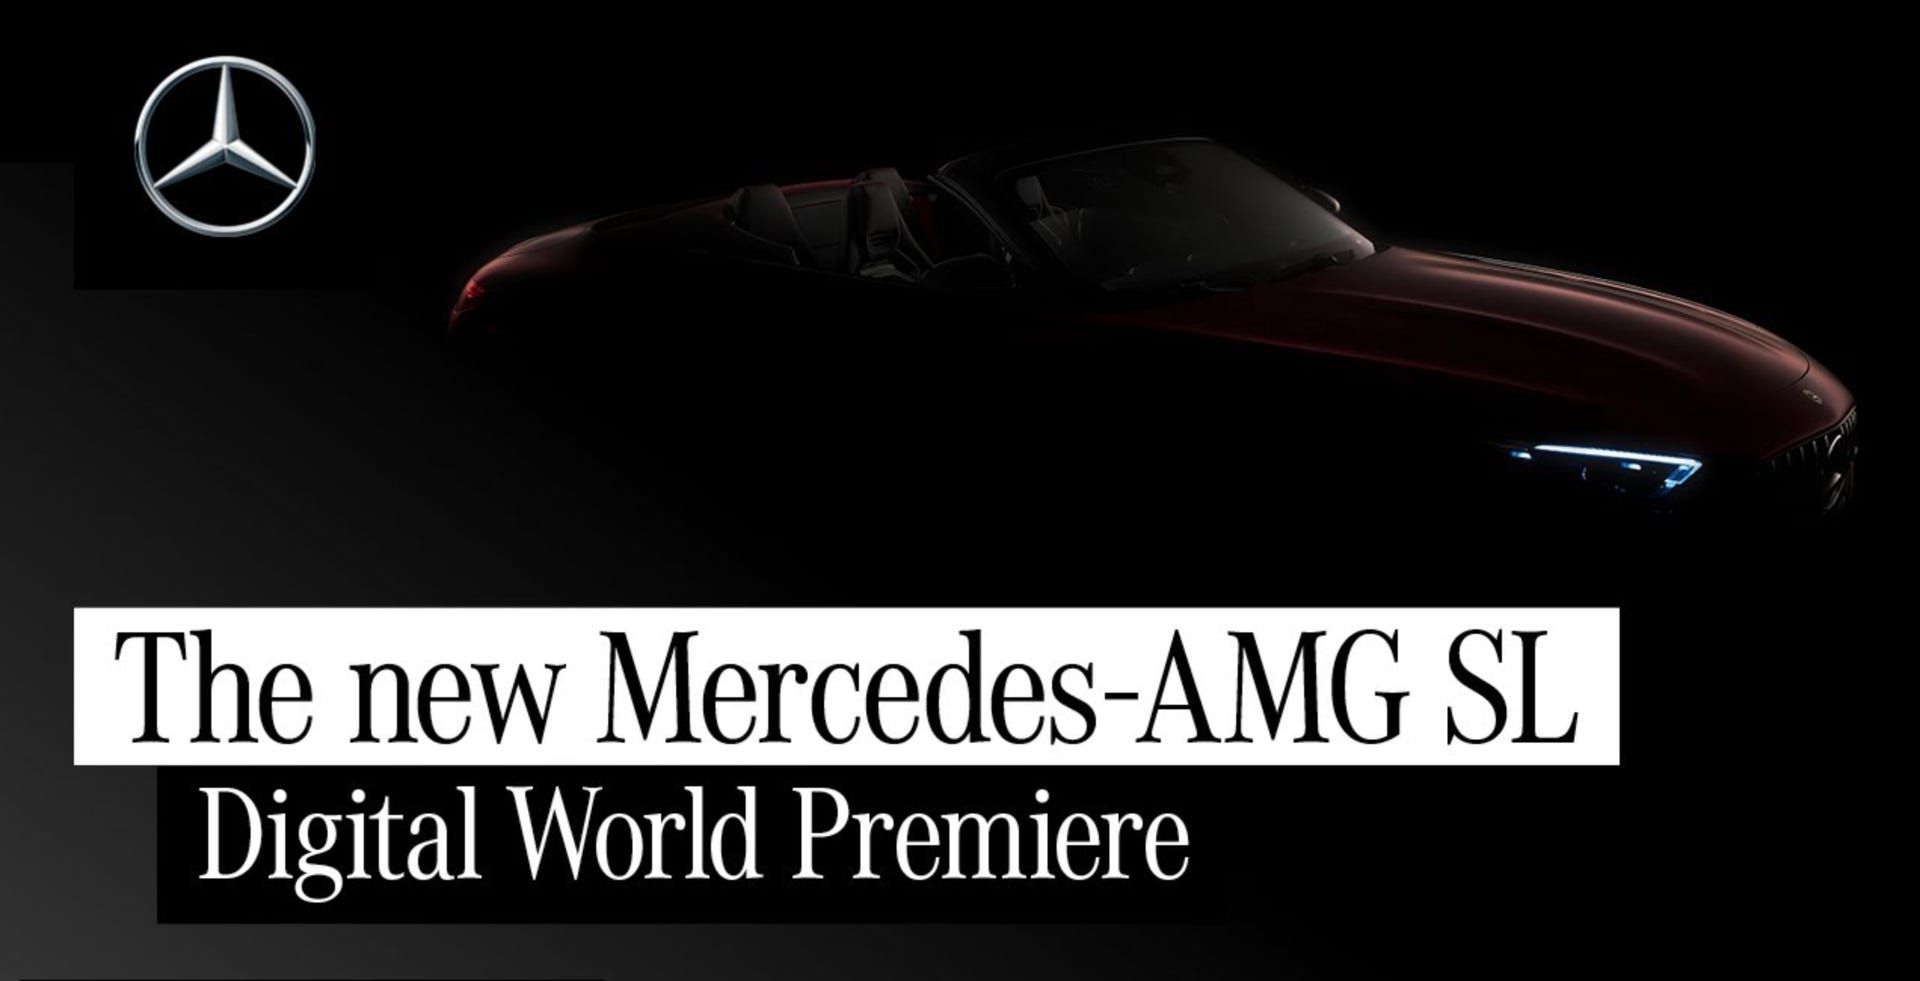 Mercedes-AMG SL how to watch